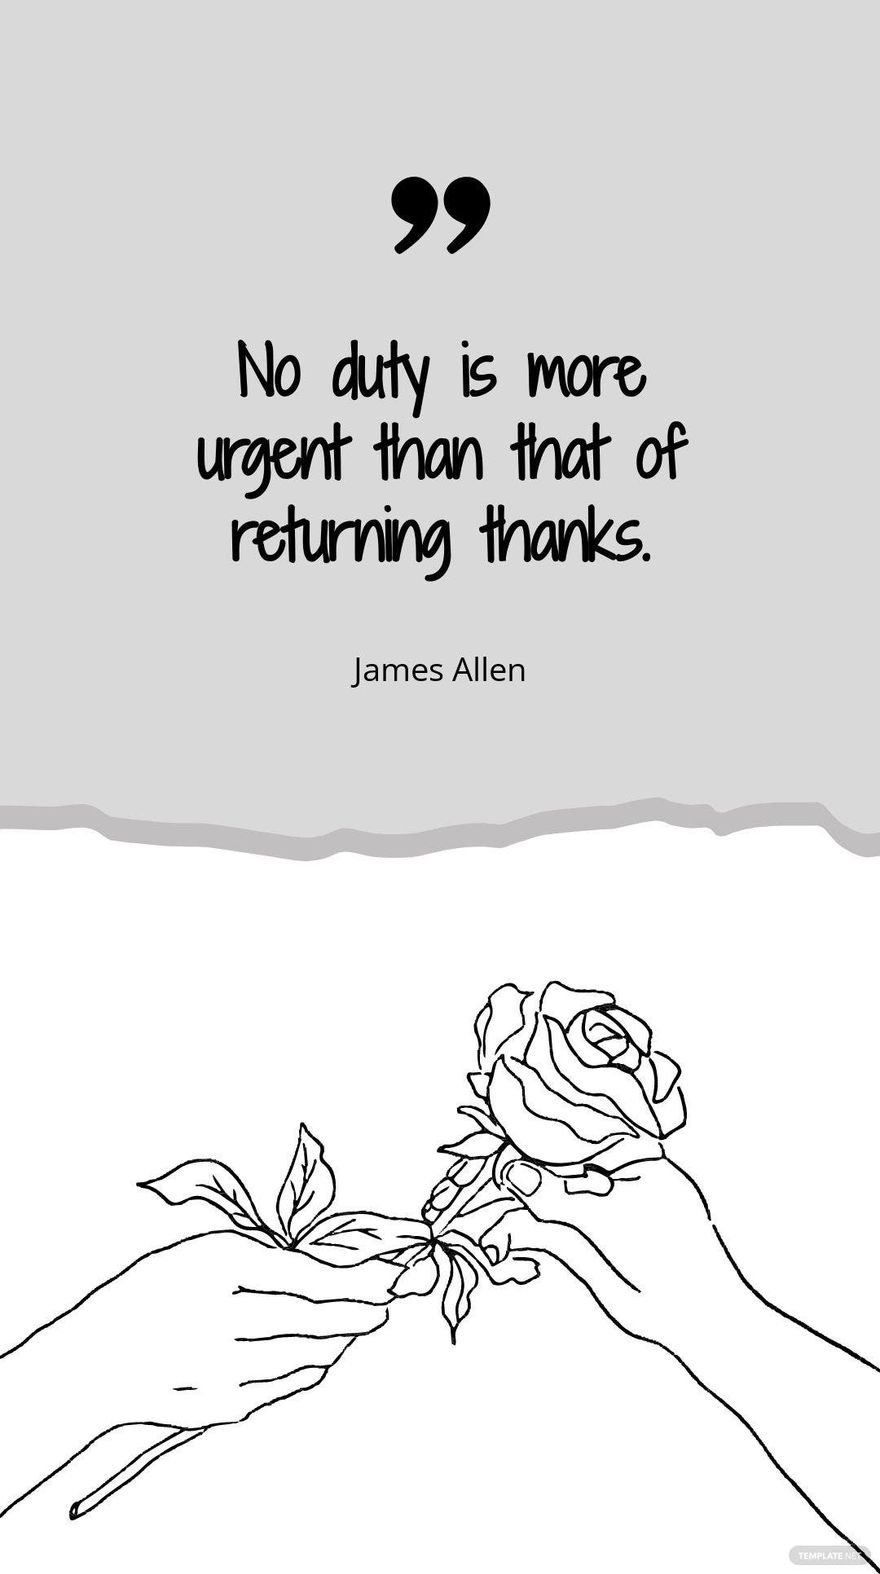 Free James Allen - "No duty is more urgent than that of returning thanks.” in JPG